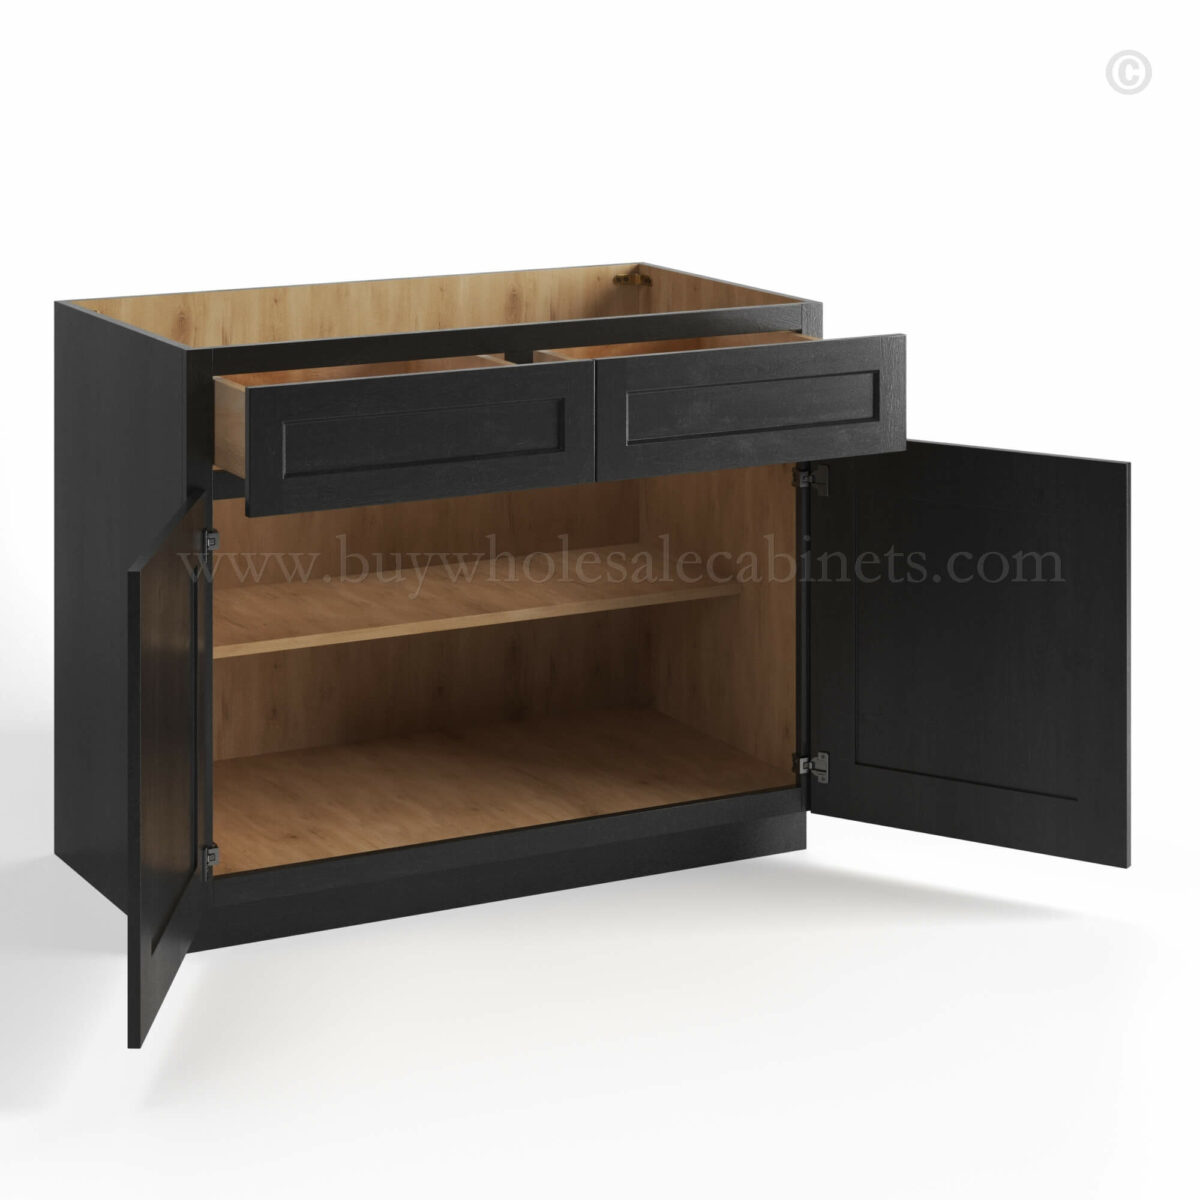 charcoal black shaker base cabinet with two doors and two drawers open, rta cabinets, wholesale cabinets